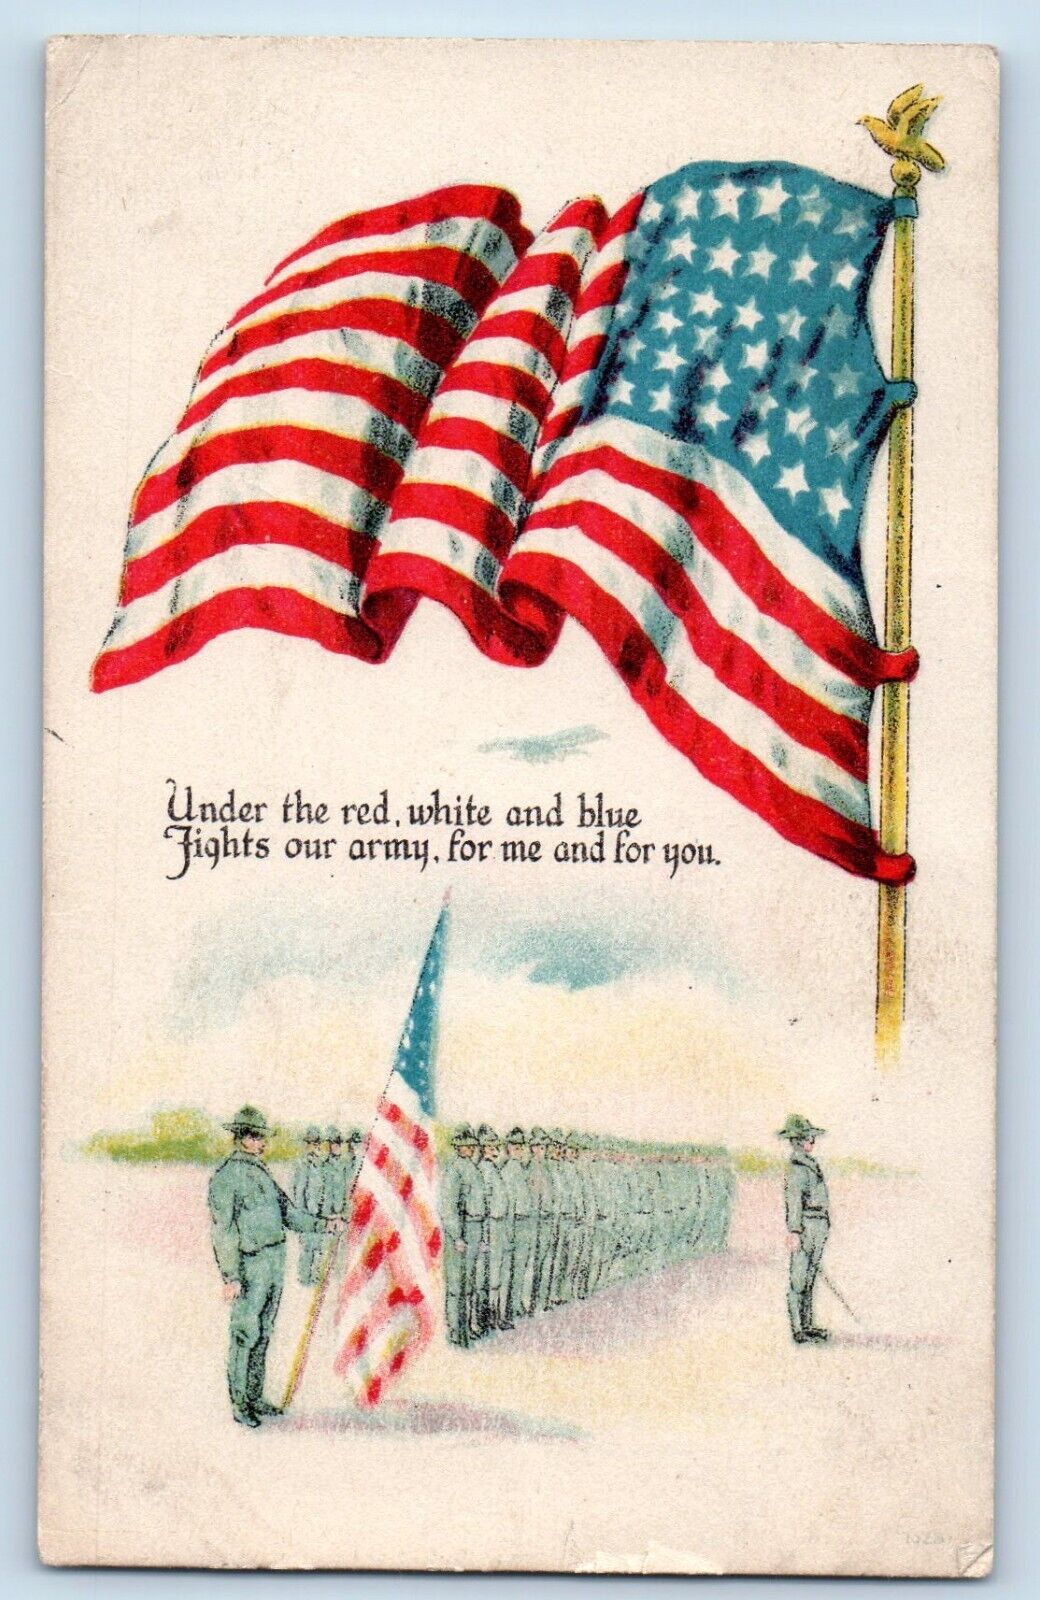 Drummond Wisconsin WI Postcard Military Soldiers Patriotic Flag WWI 1917 Antique